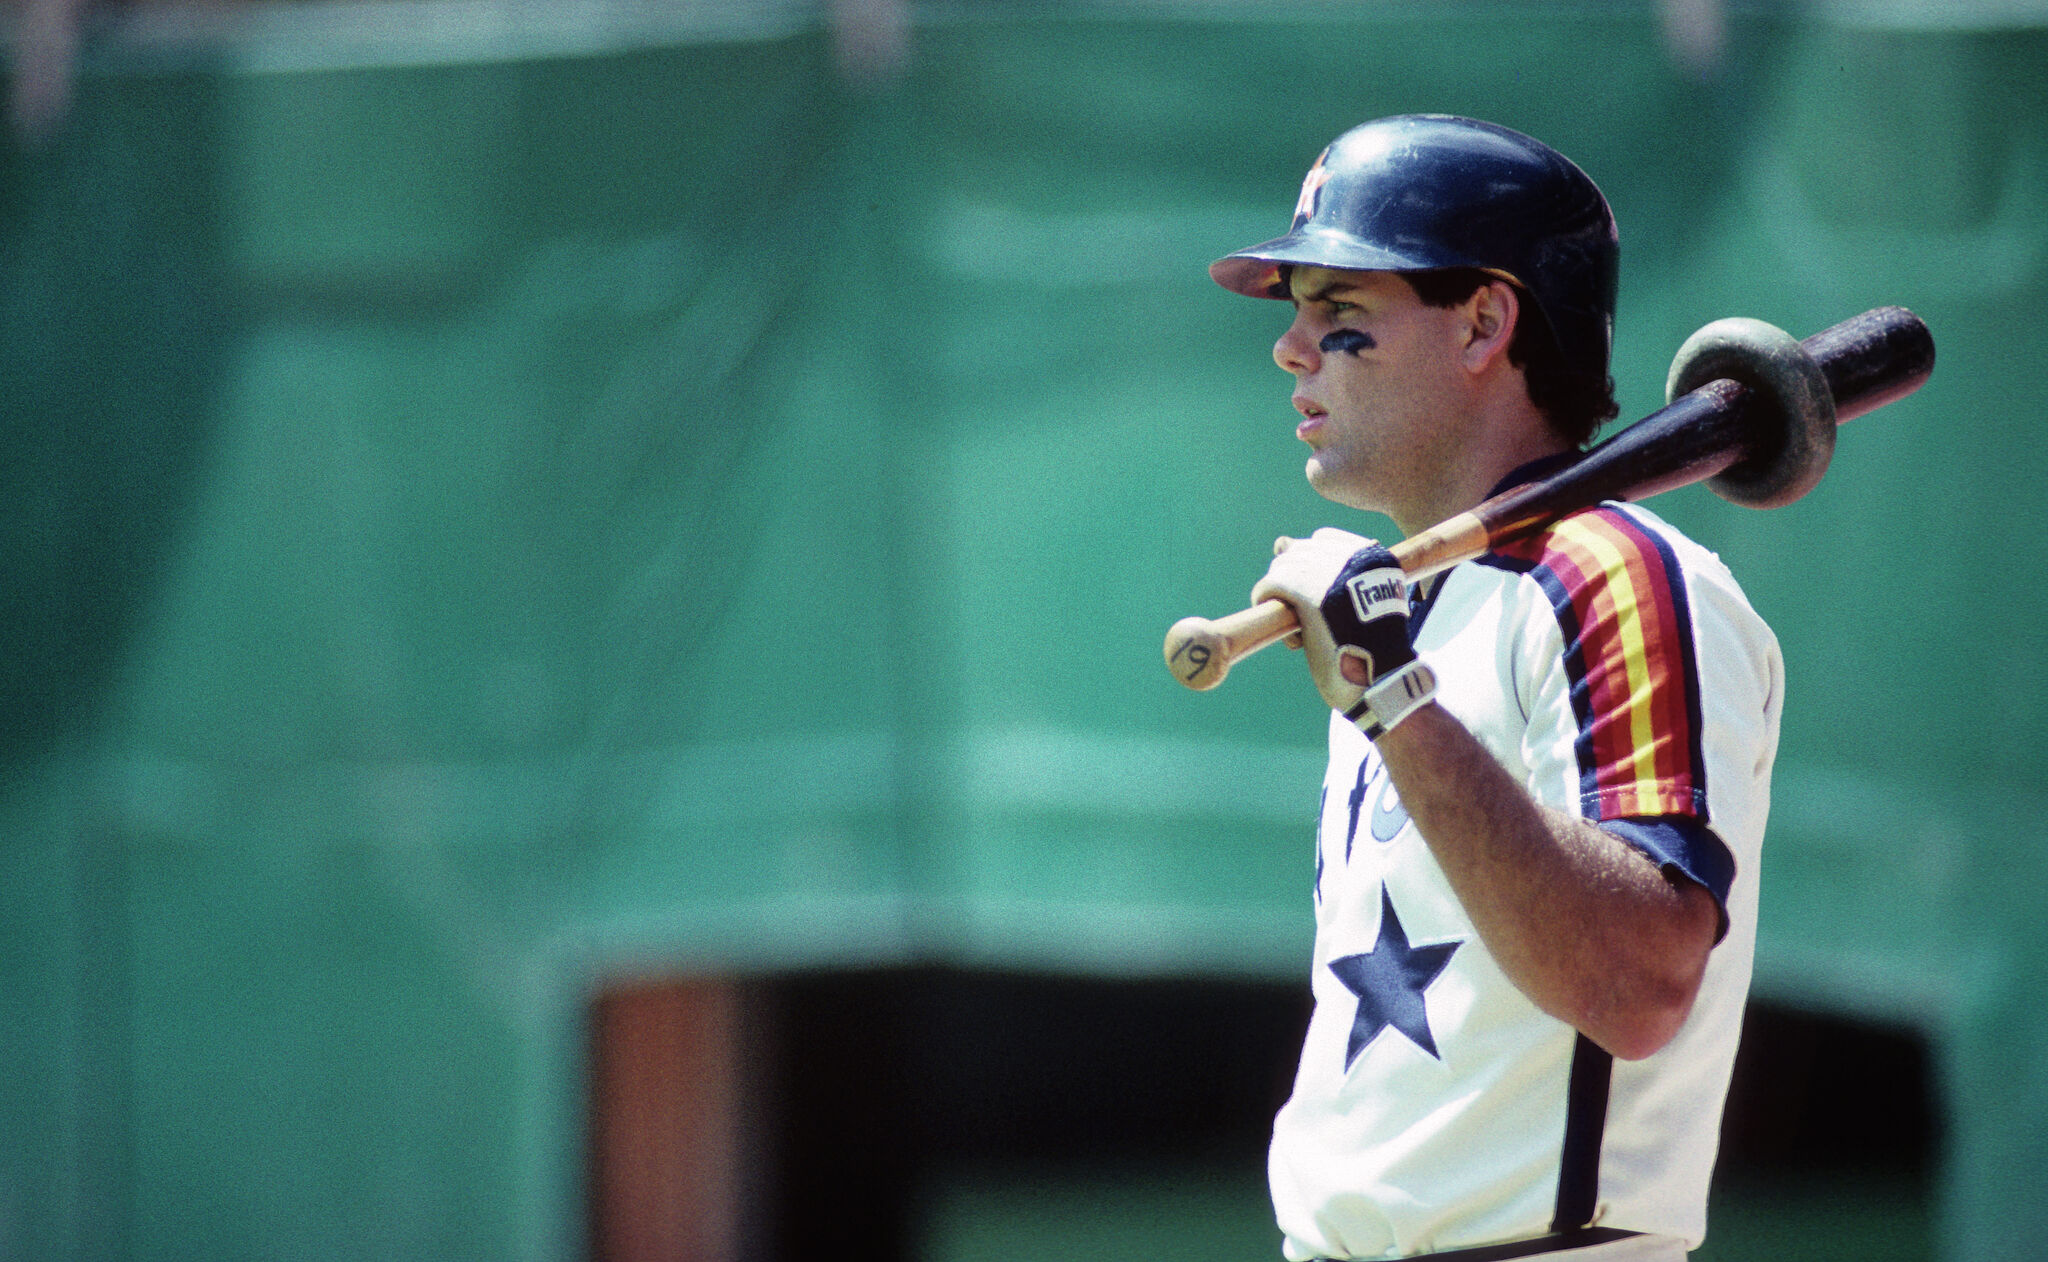 10 things we learned about former Astros star Ken Caminiti in new book  'Playing Through the Pain